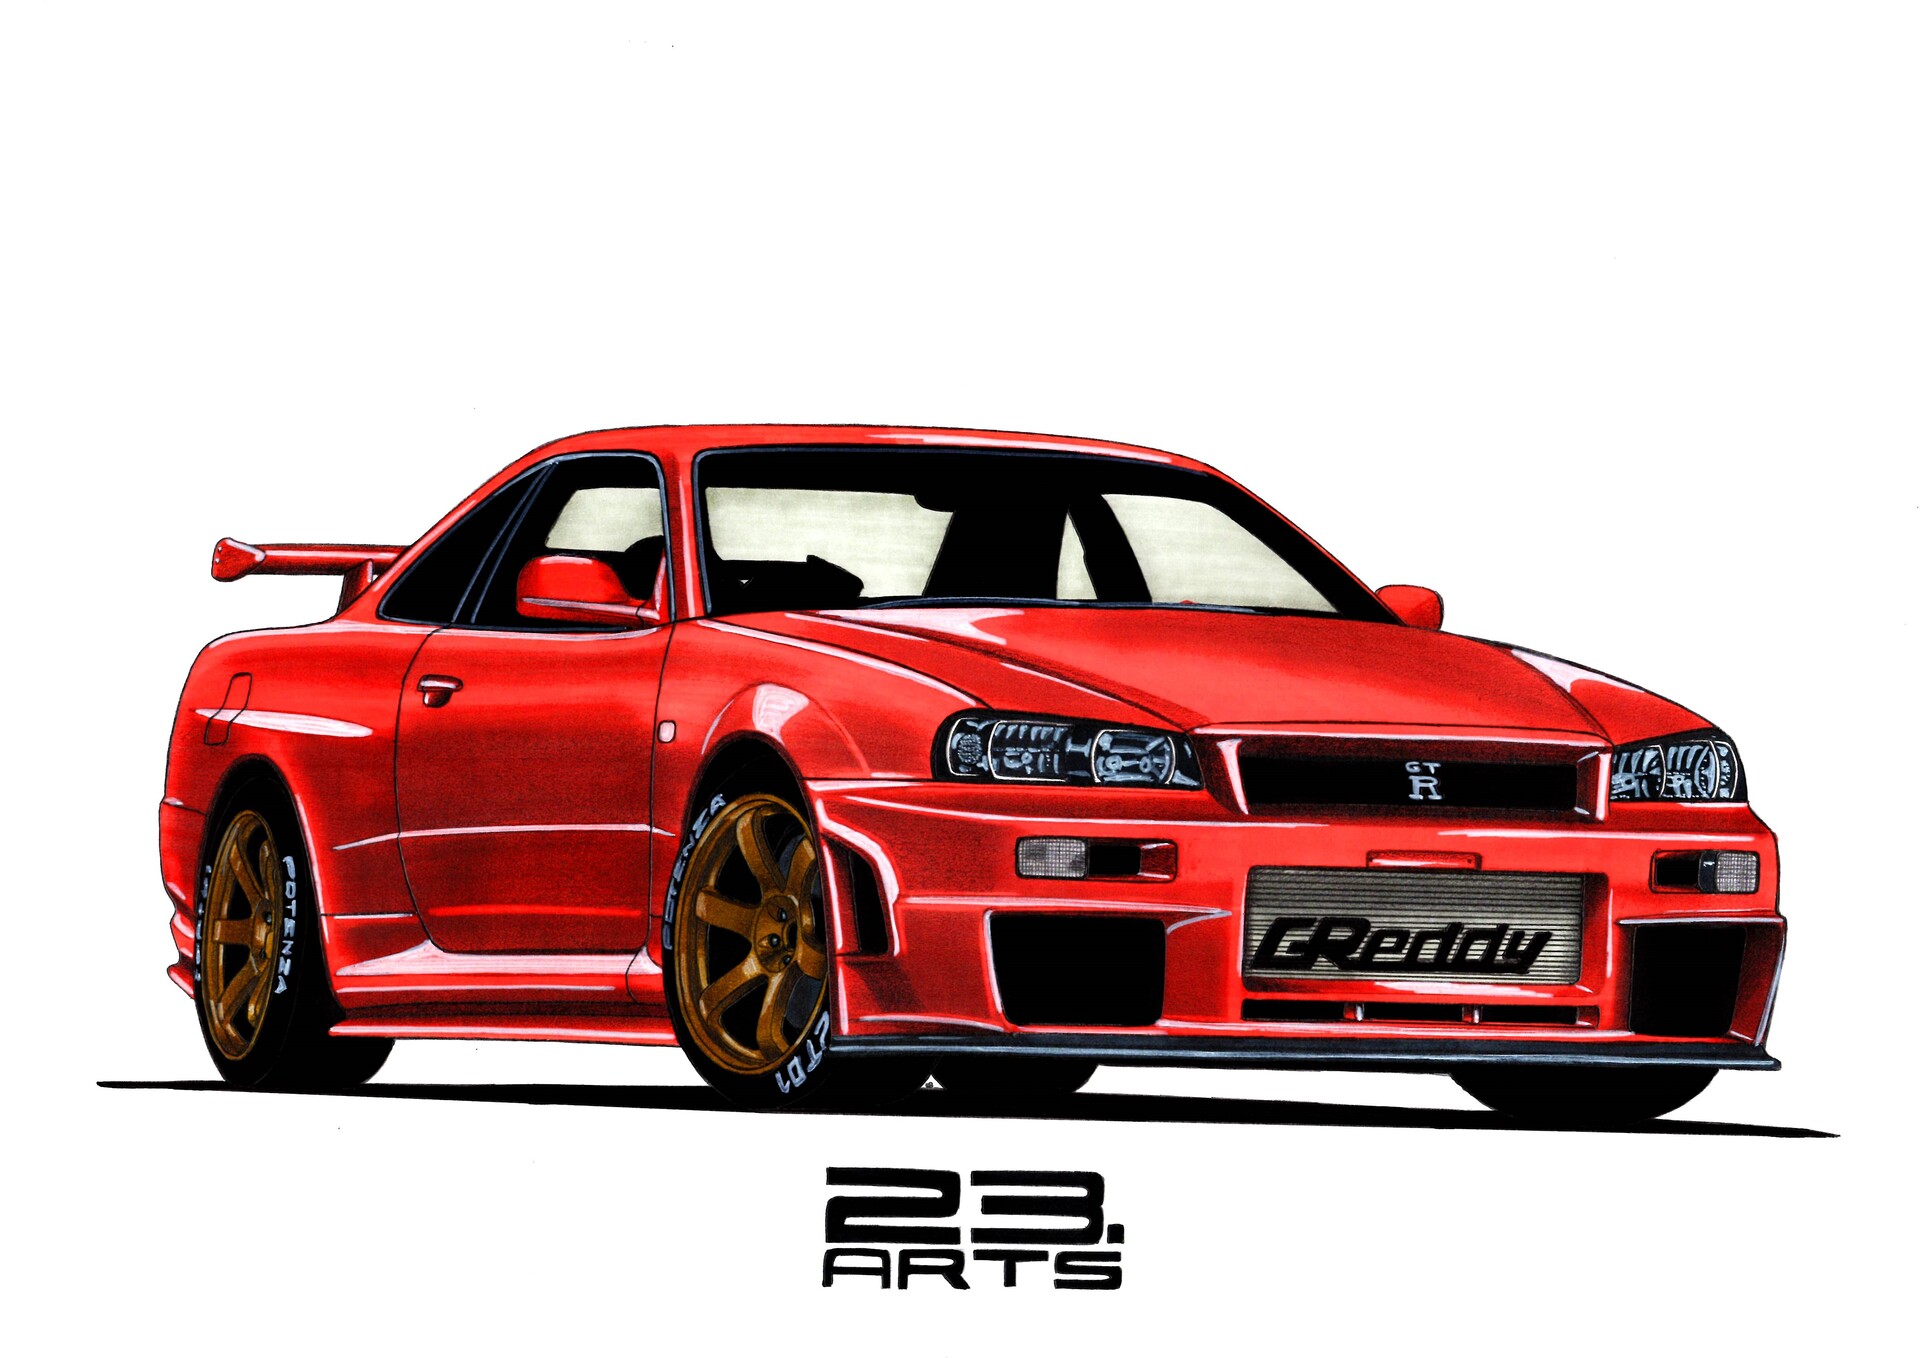 How To Draw A Nissan Skyline We have previously shown you how to draw a